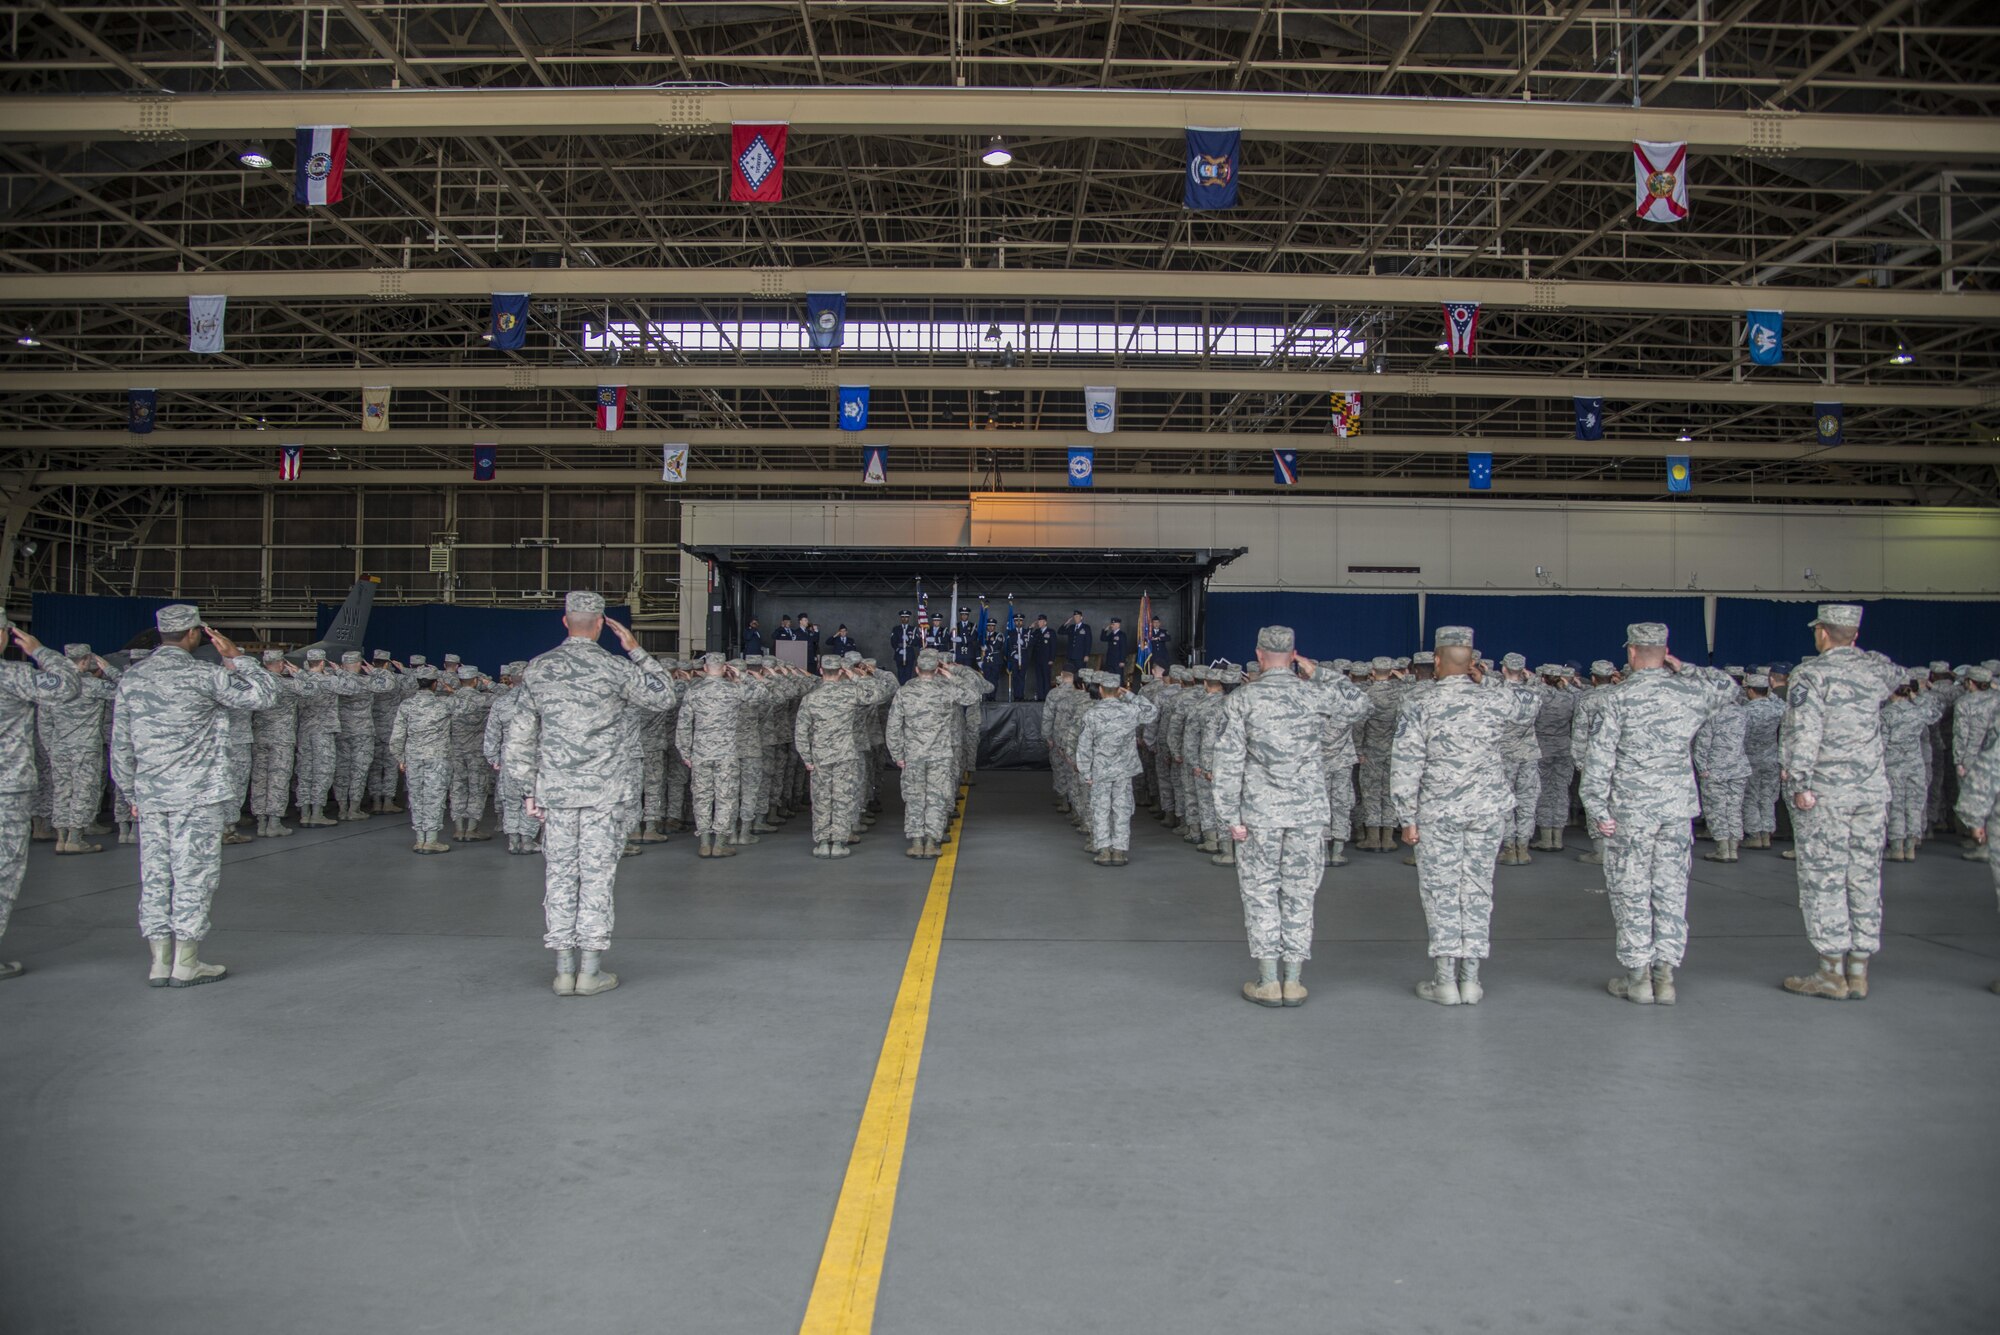 Airmen from the 35th Fighter Wing salute in formation during the 35th FW change of command ceremony at Misawa Air Base, Japan, July 7, 2016. The Airmen gathered to witness Col. Timothy Sundvall relinquish command to Col. R. Scott Jobe, the new 35th FW commander. (U.S. Air Force photo by Senior Airman Brittany A. Chase)